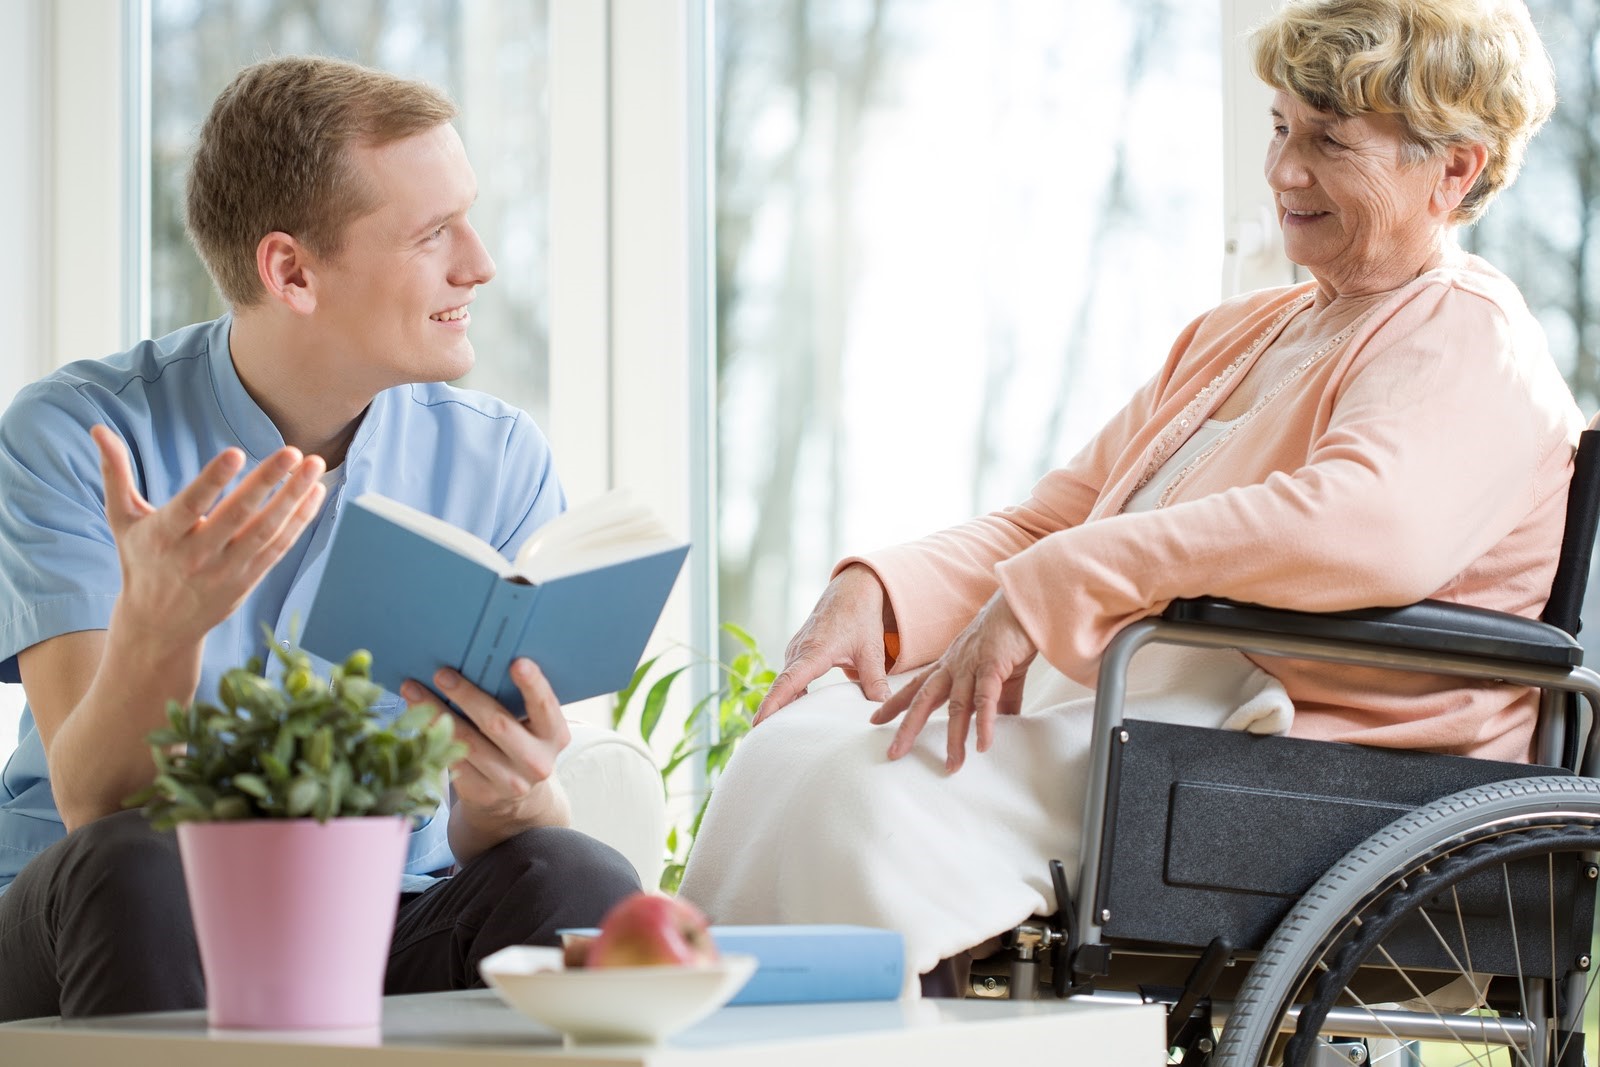 Planning in home care, recovery, and rehabilitation for a stroke patient